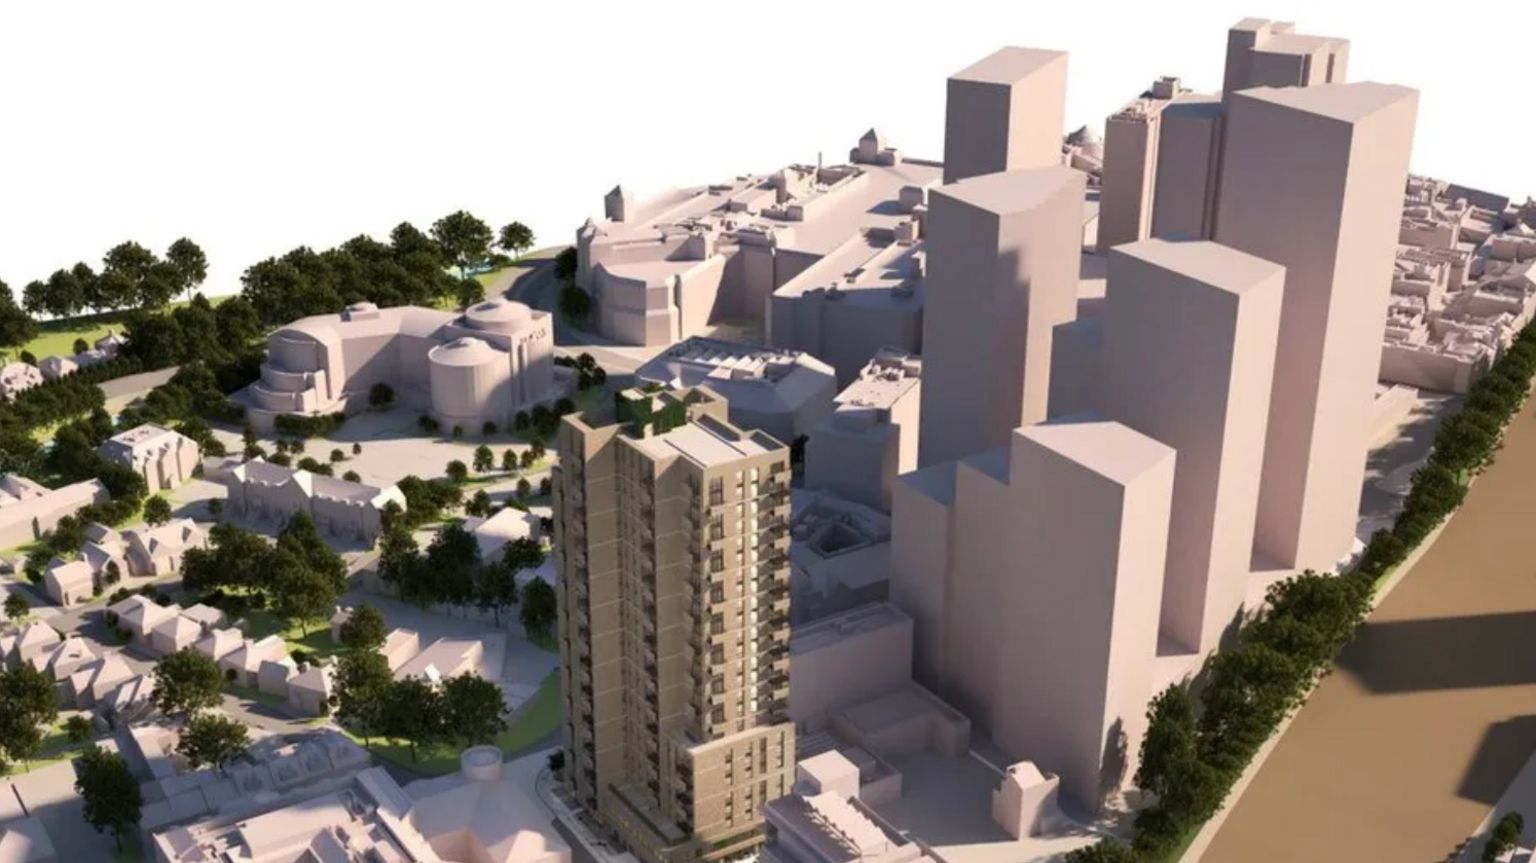 Artist's impression of the block of flats proposed for Woking